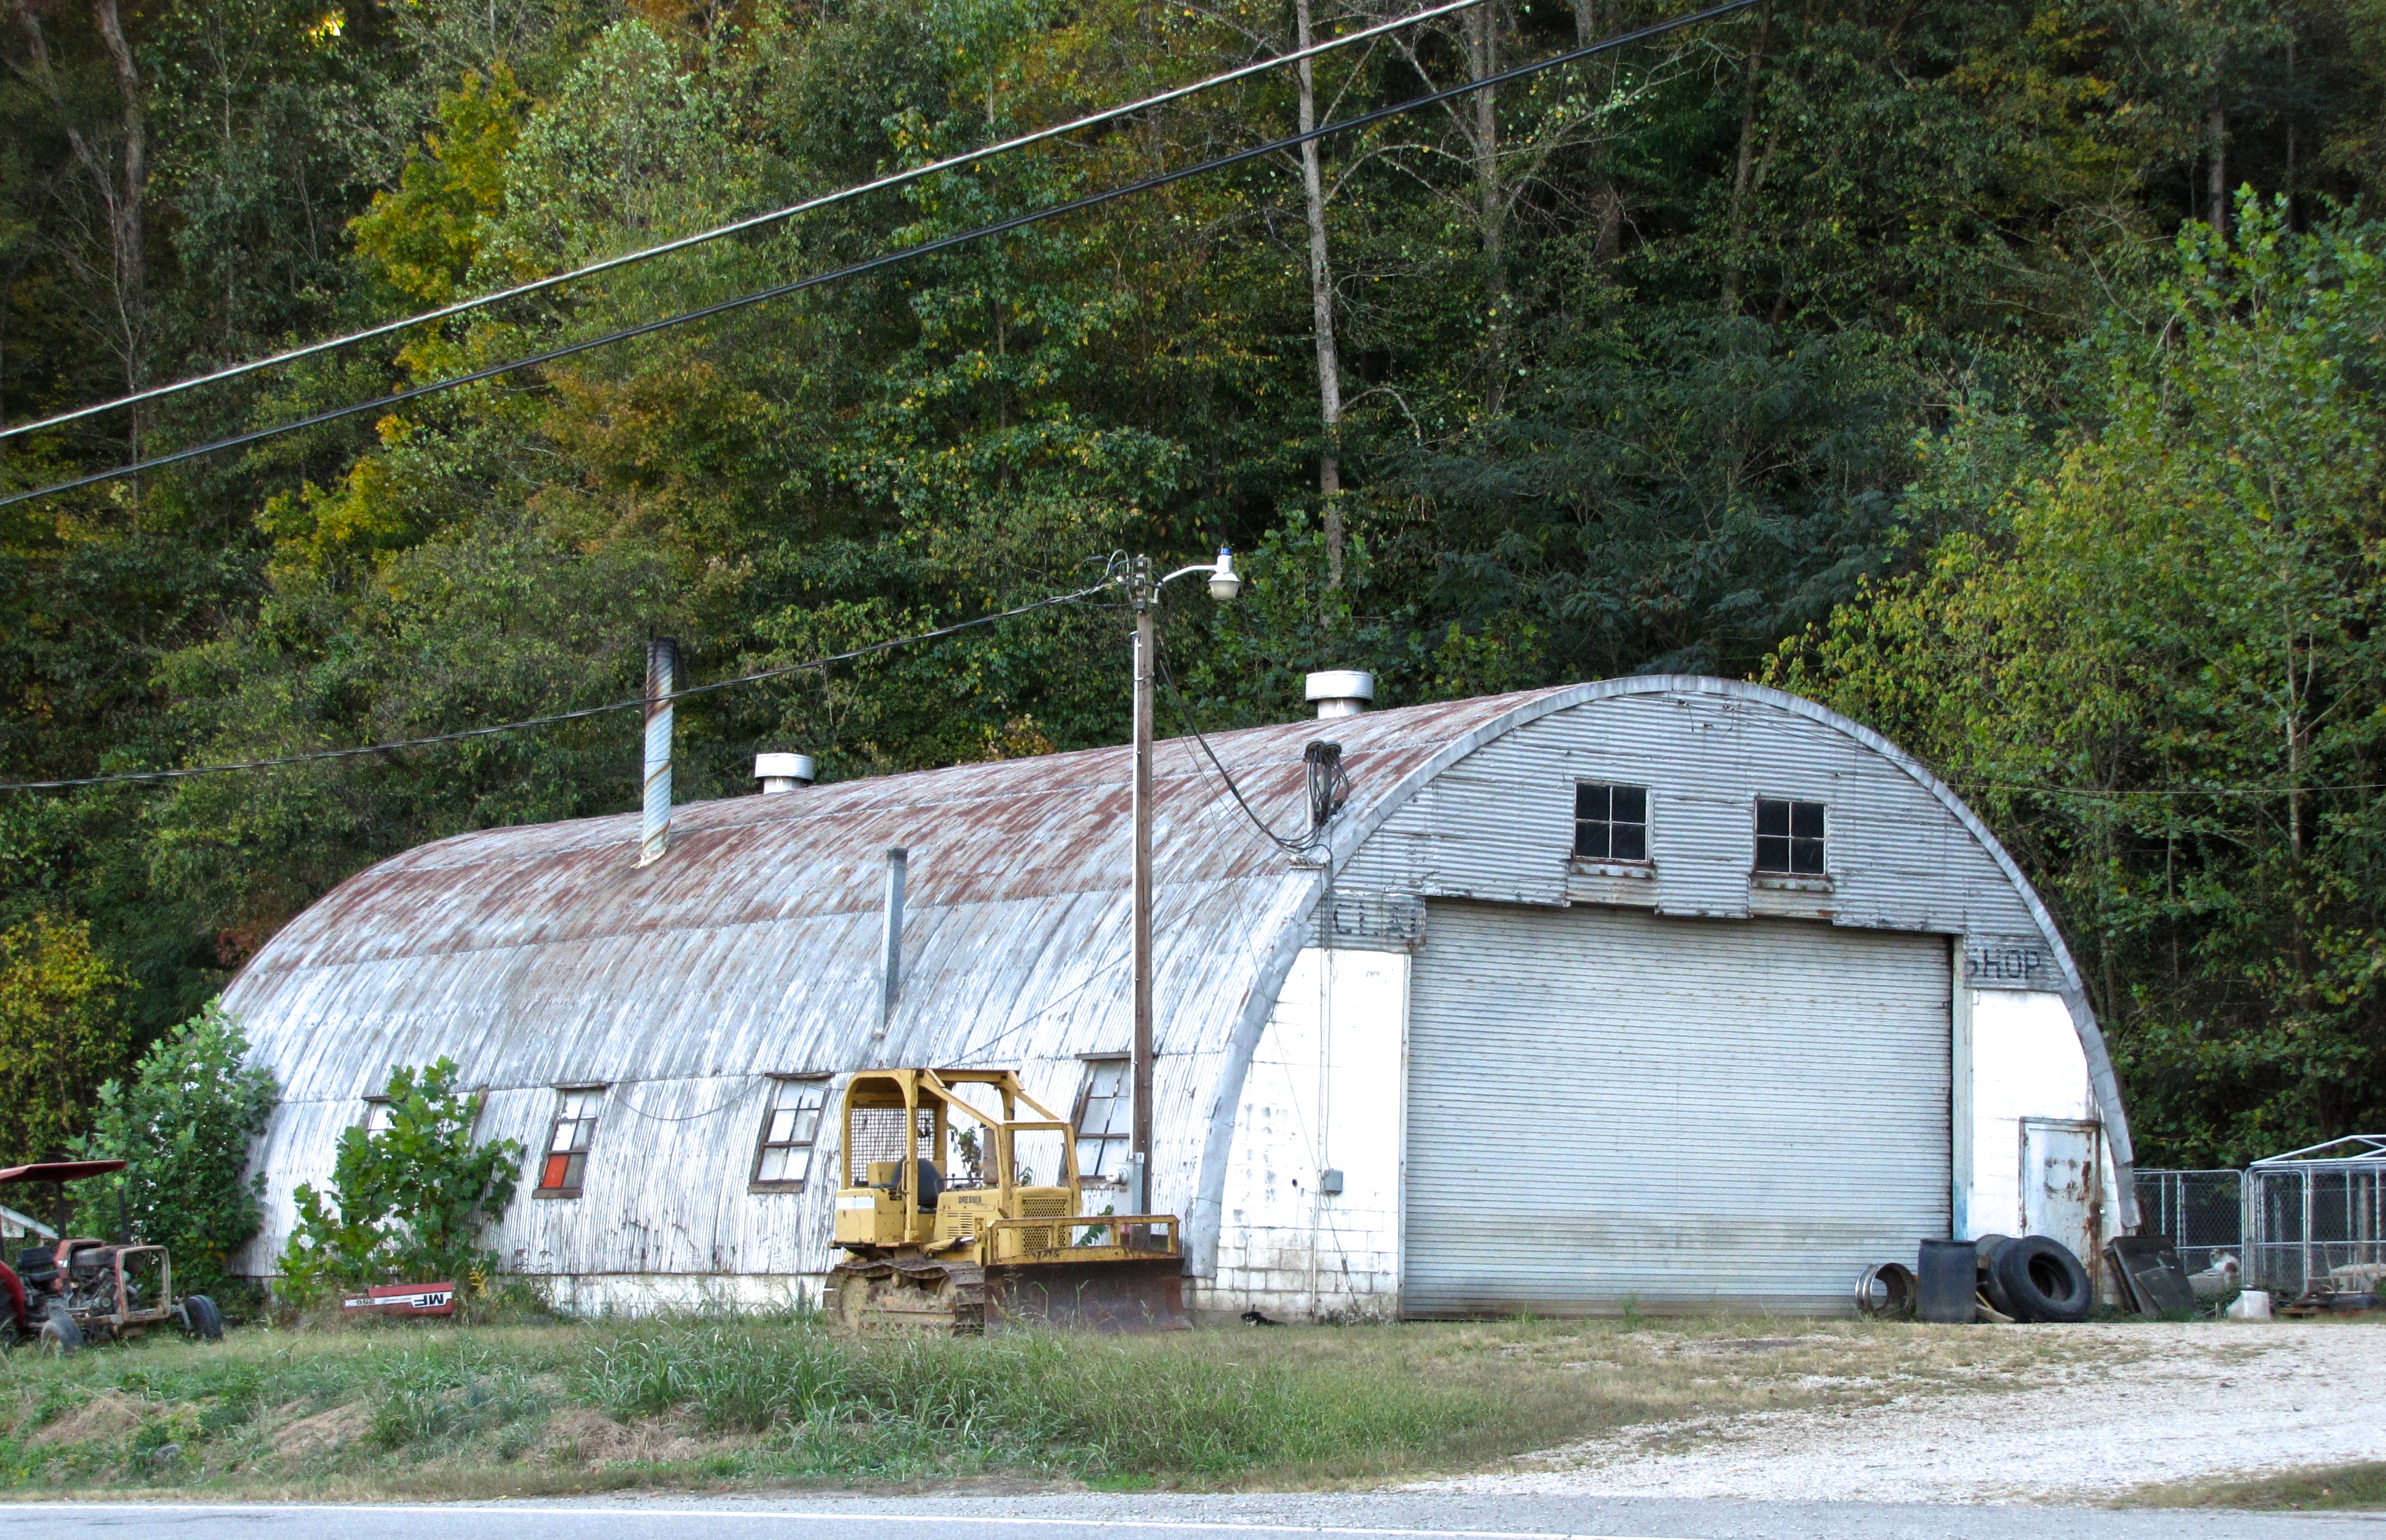 quonset hut in Kenner, LA